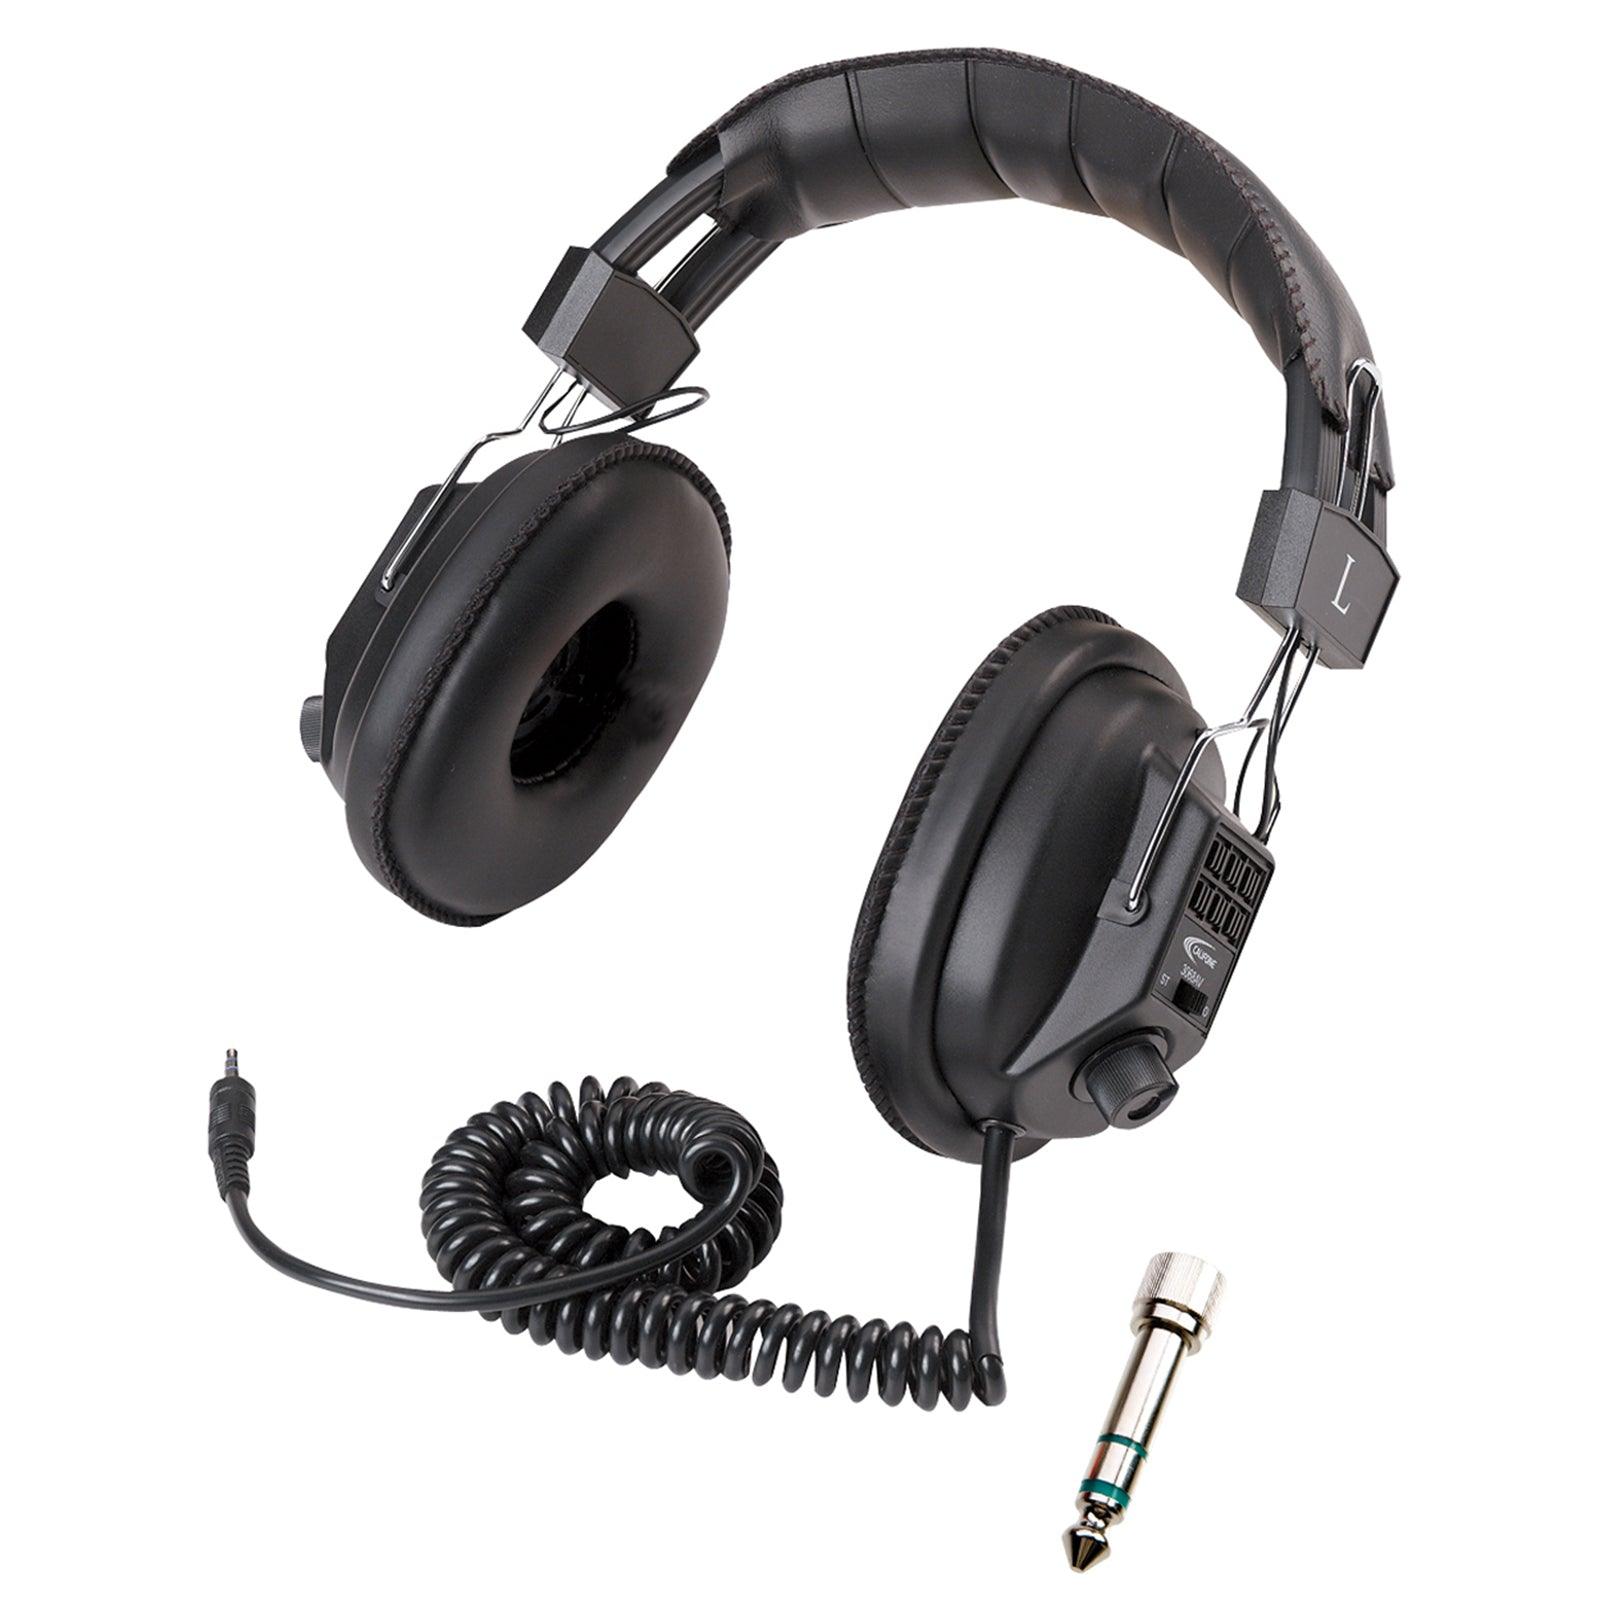 Switchable Stereo/Mono Headphone, with 3.5mm plug and 1/4" adapter - Loomini